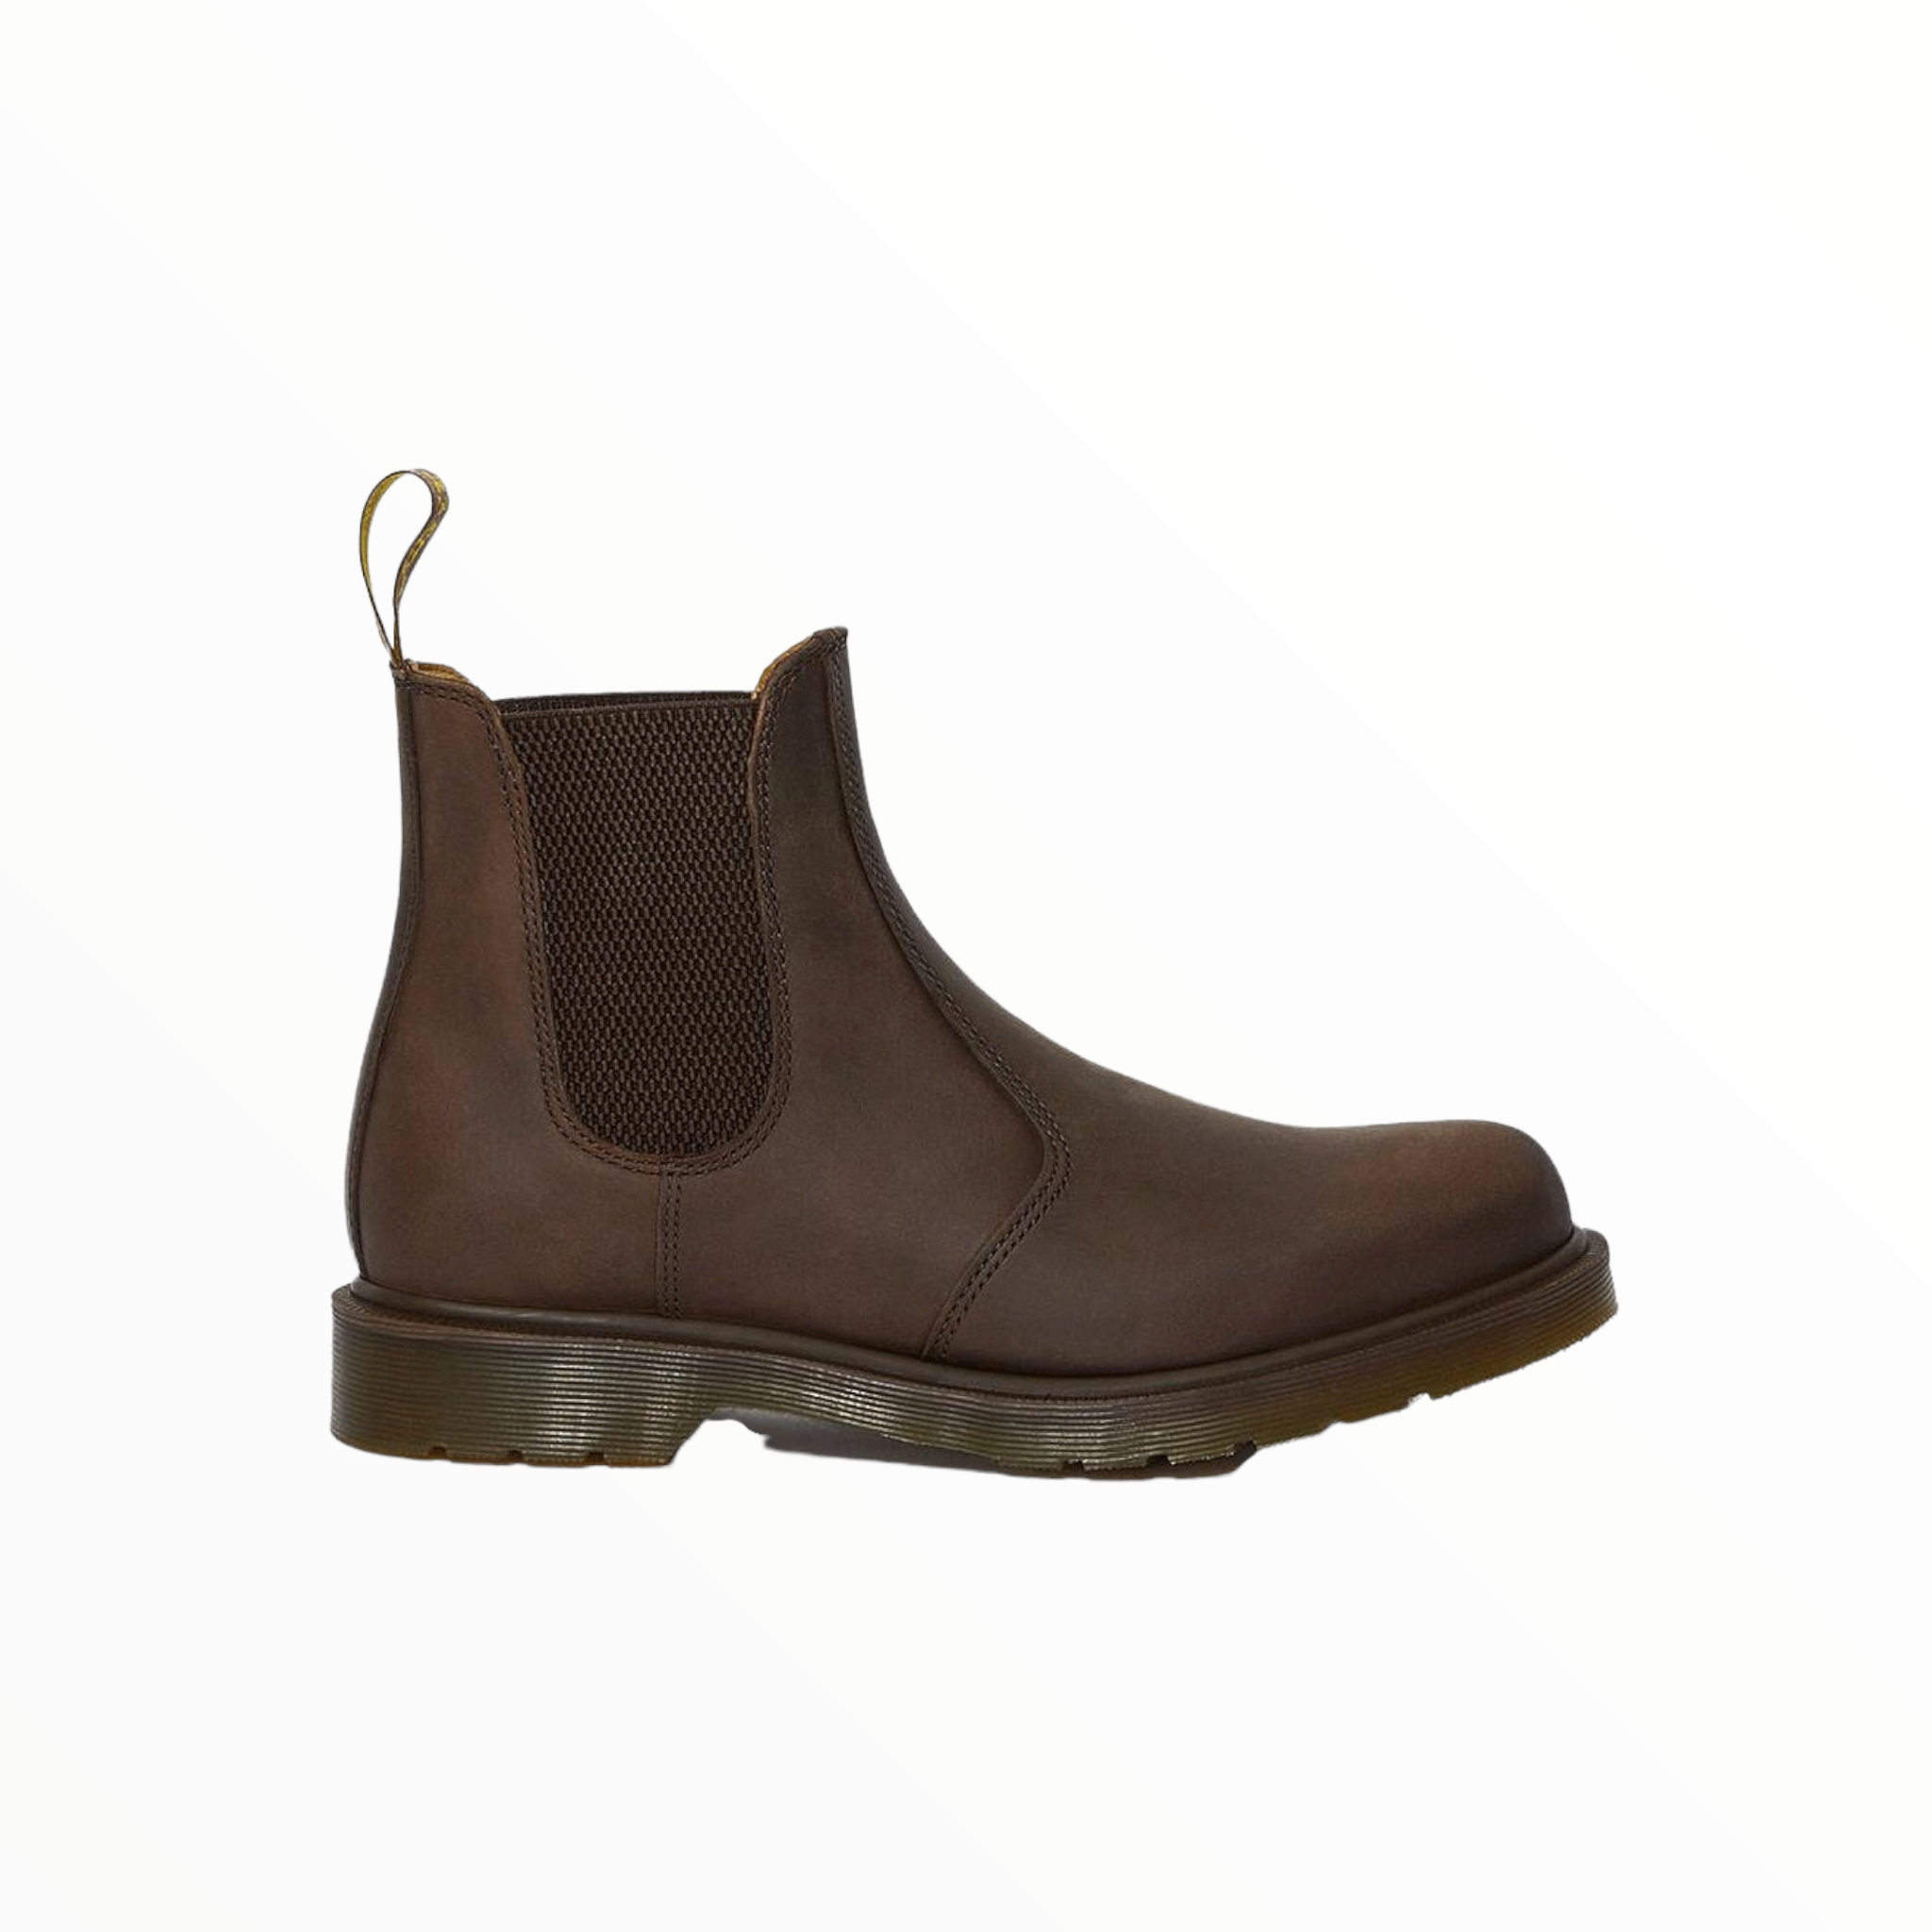 Shop 2976 Chelsea Dr Martens - with shoe&amp;me - from Dr. Martens - Boots - Boot, Mens, Winter, Womens - [collection]